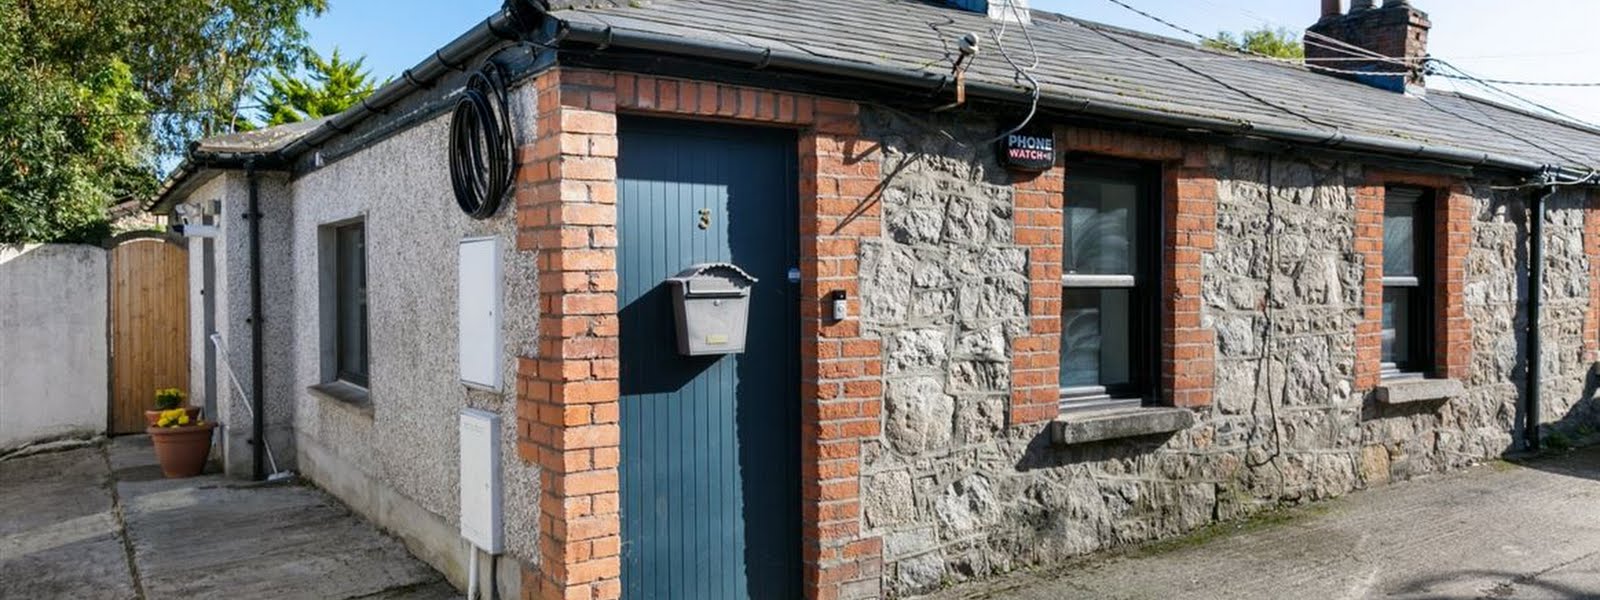 It may appear tiny from the front, but this Ballsbridge cottage on the market for €750,000 is surprisingly spacious